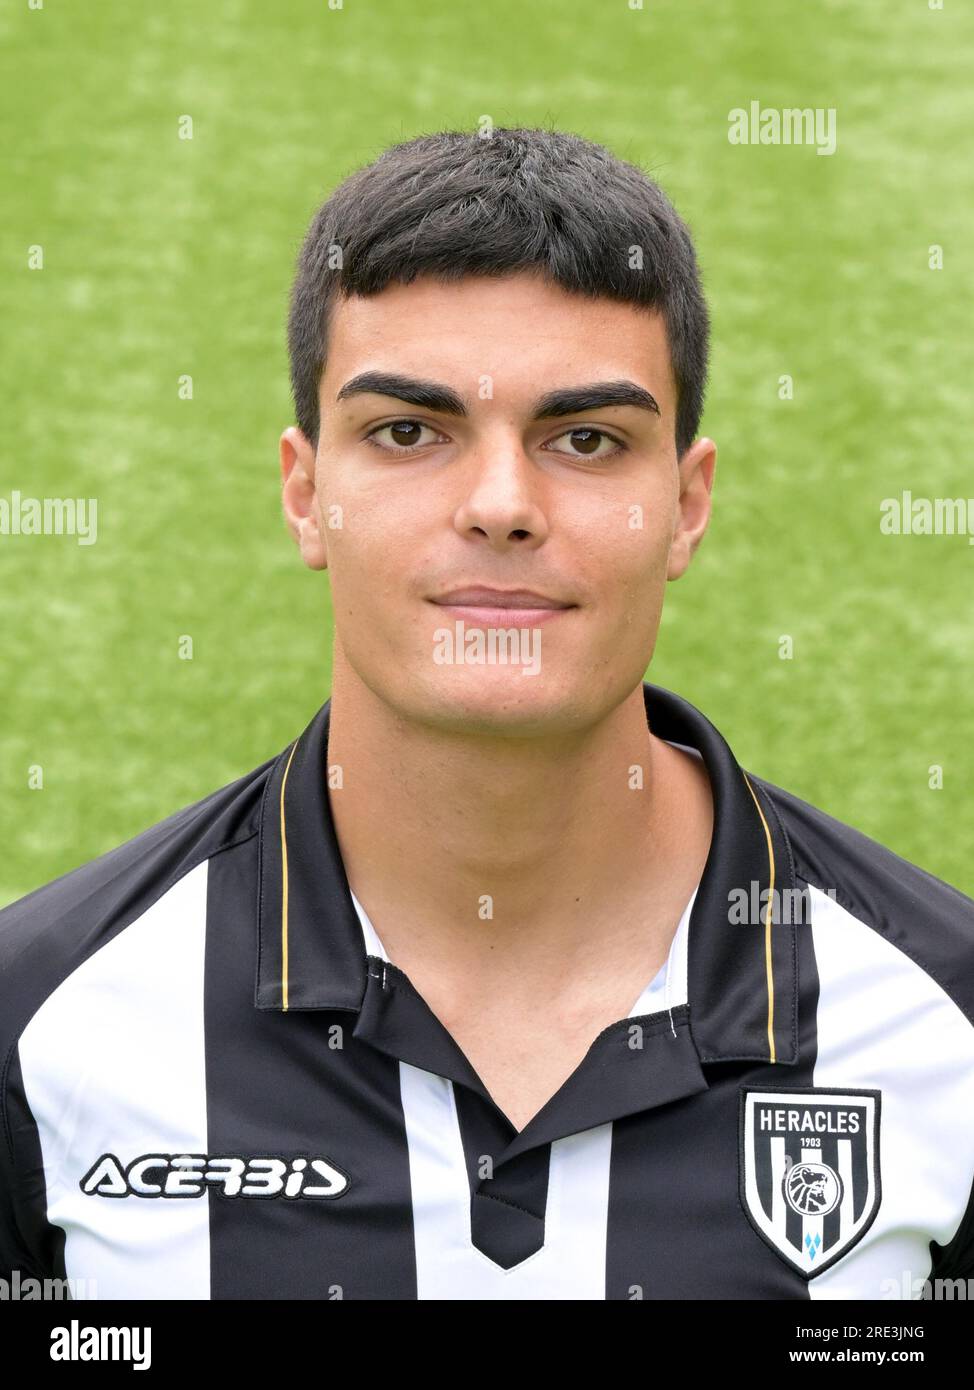 ALMELO - Antonio Satriano during the Photo Press Day of Heracles Almelo at the Erve Asito stadium on July 24, 2023 in Almelo, Netherlands. AP | Dutch Height | GERRIT OF COLOGNE Stock Photo